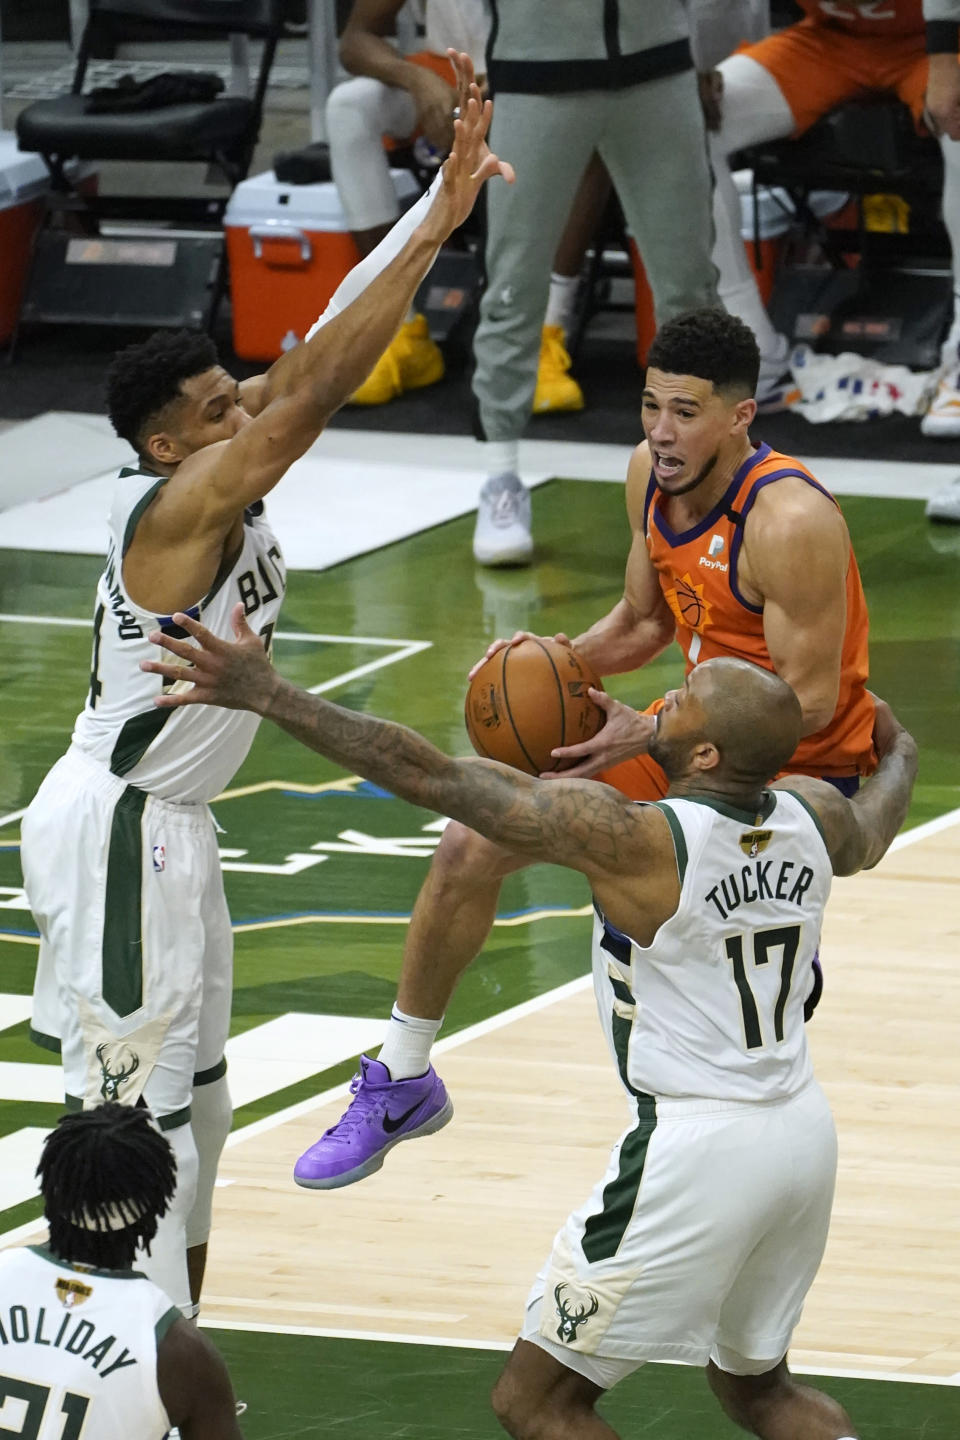 Phoenix Suns guard Devin Booker, center, drives between Milwaukee Bucks forward Giannis Antetokounmpo, left, and forward P.J. Tucker (17) during the second half of Game 4 of basketball's NBA Finals in Milwaukee, Wednesday, July 14, 2021. (AP Photo/Paul Sancya)